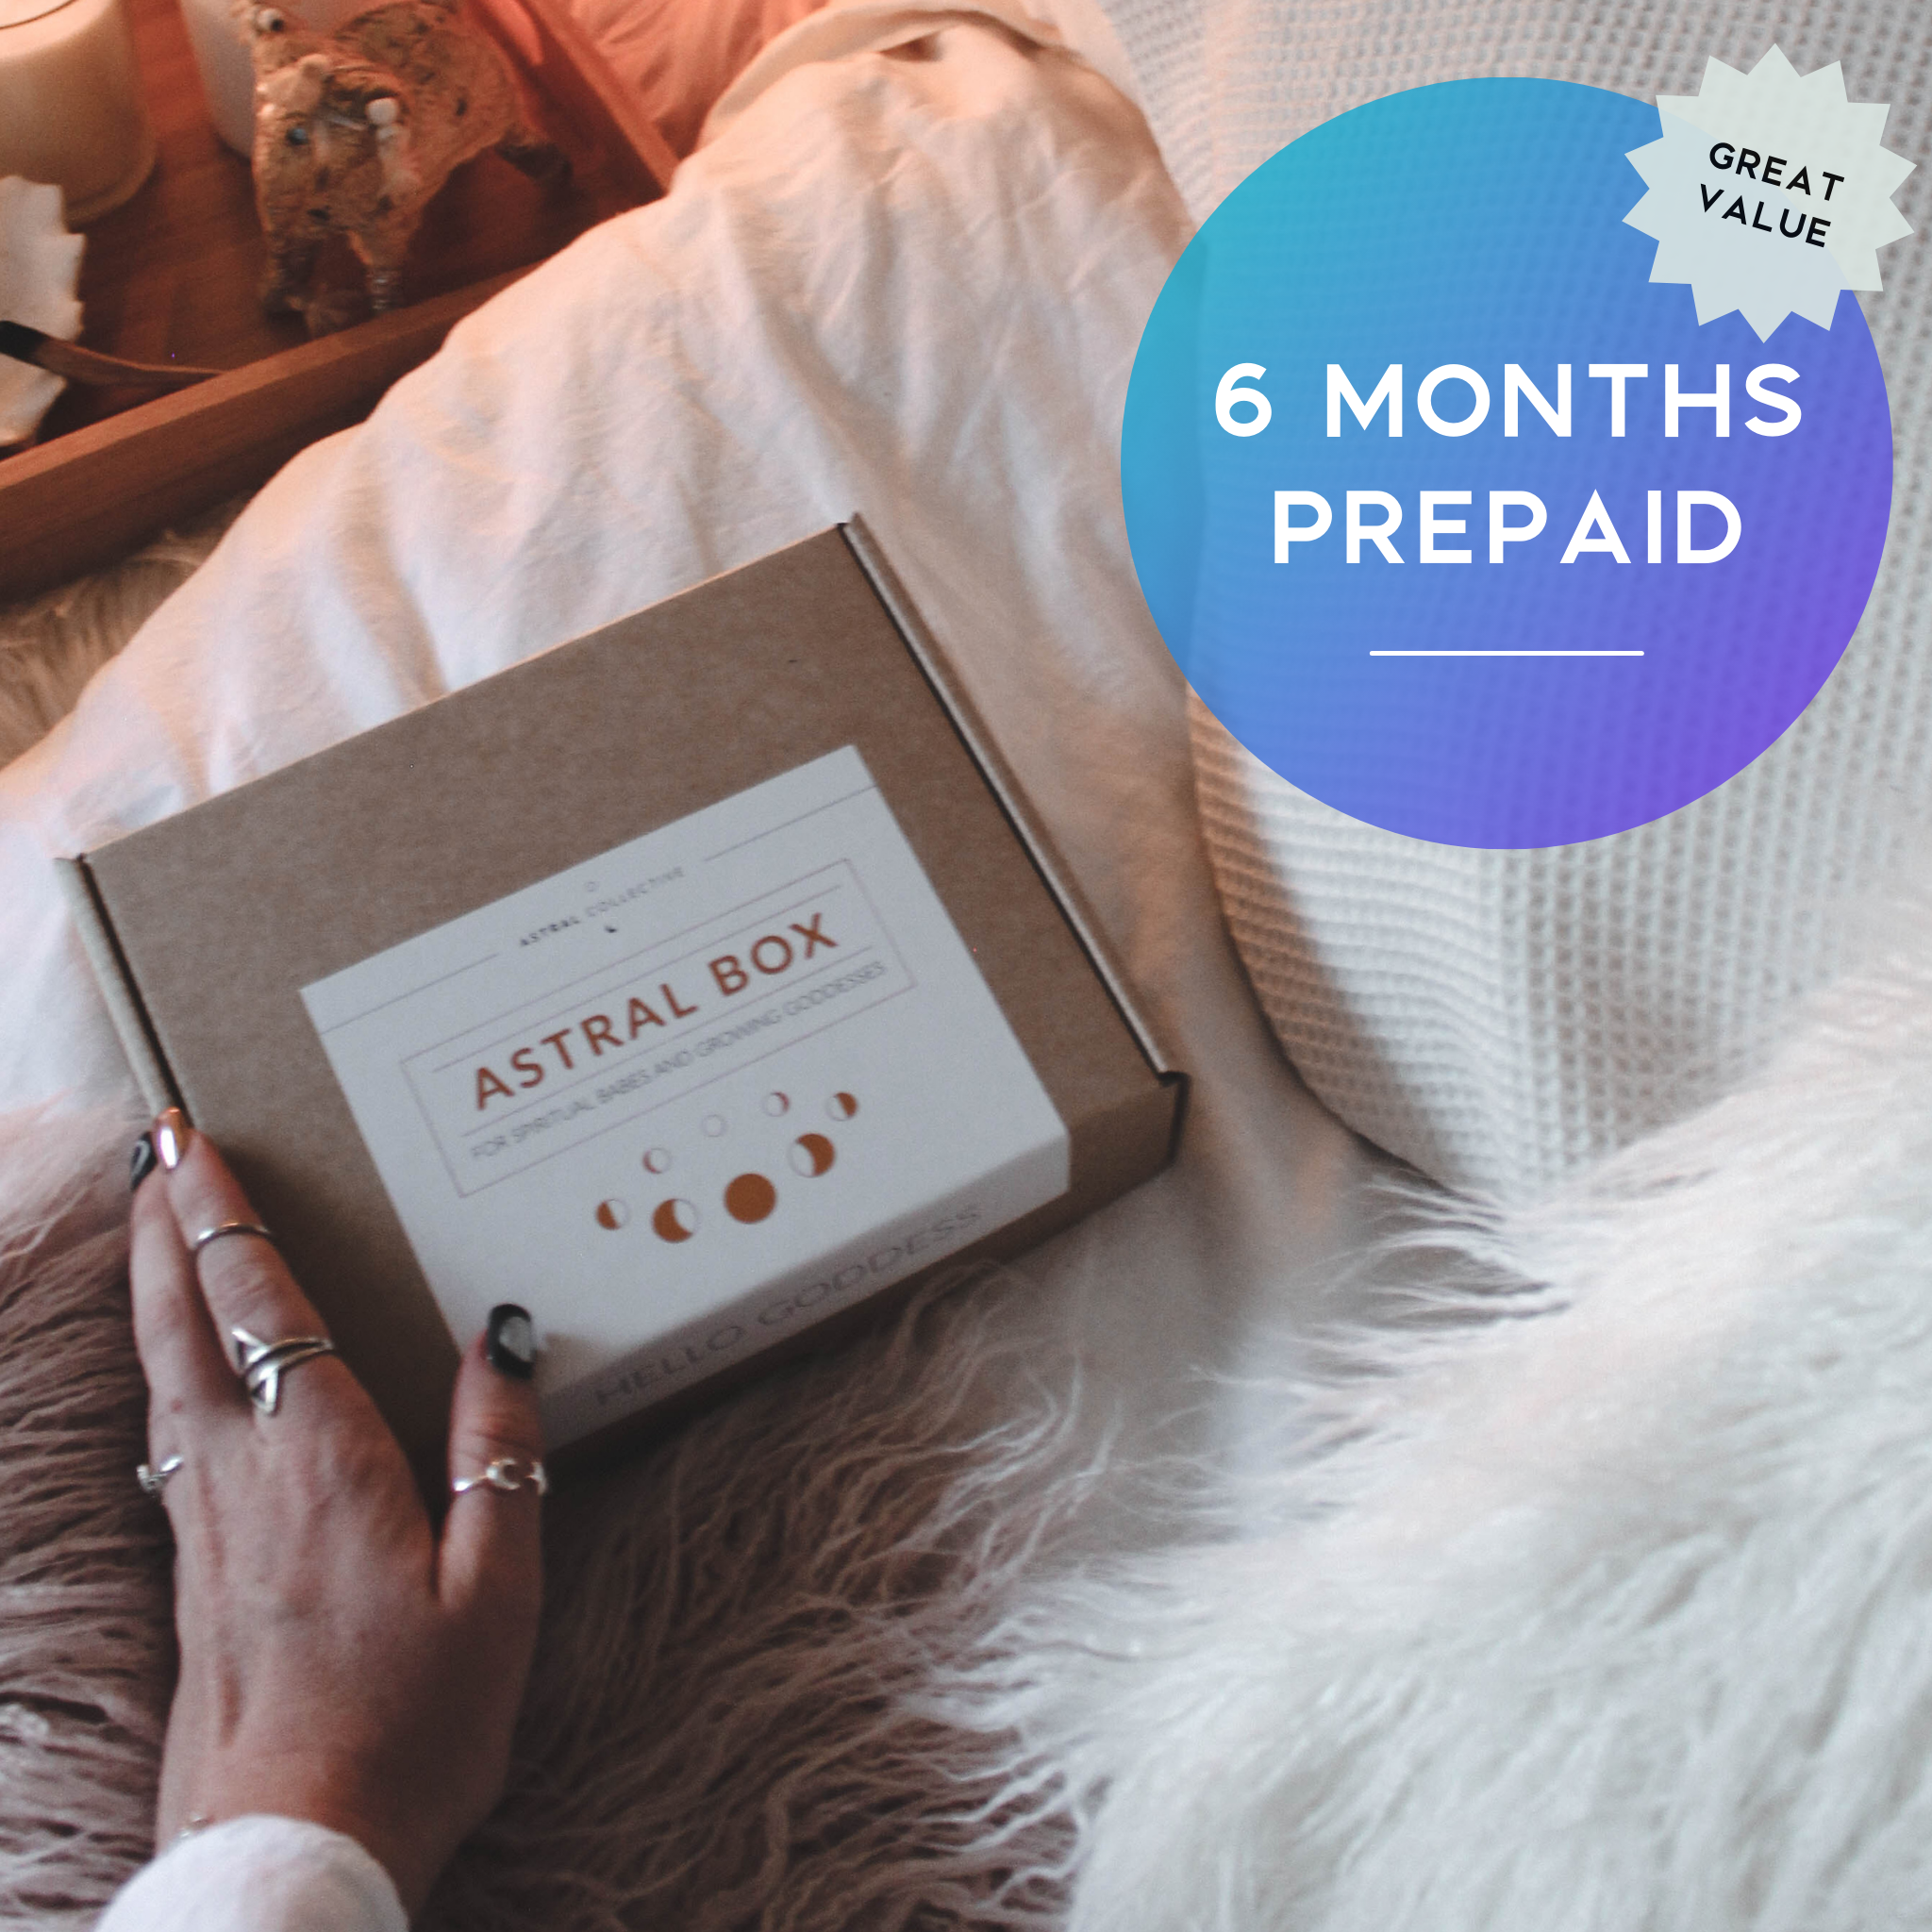 Astral Box 6 Monthly Prepaid Subscription